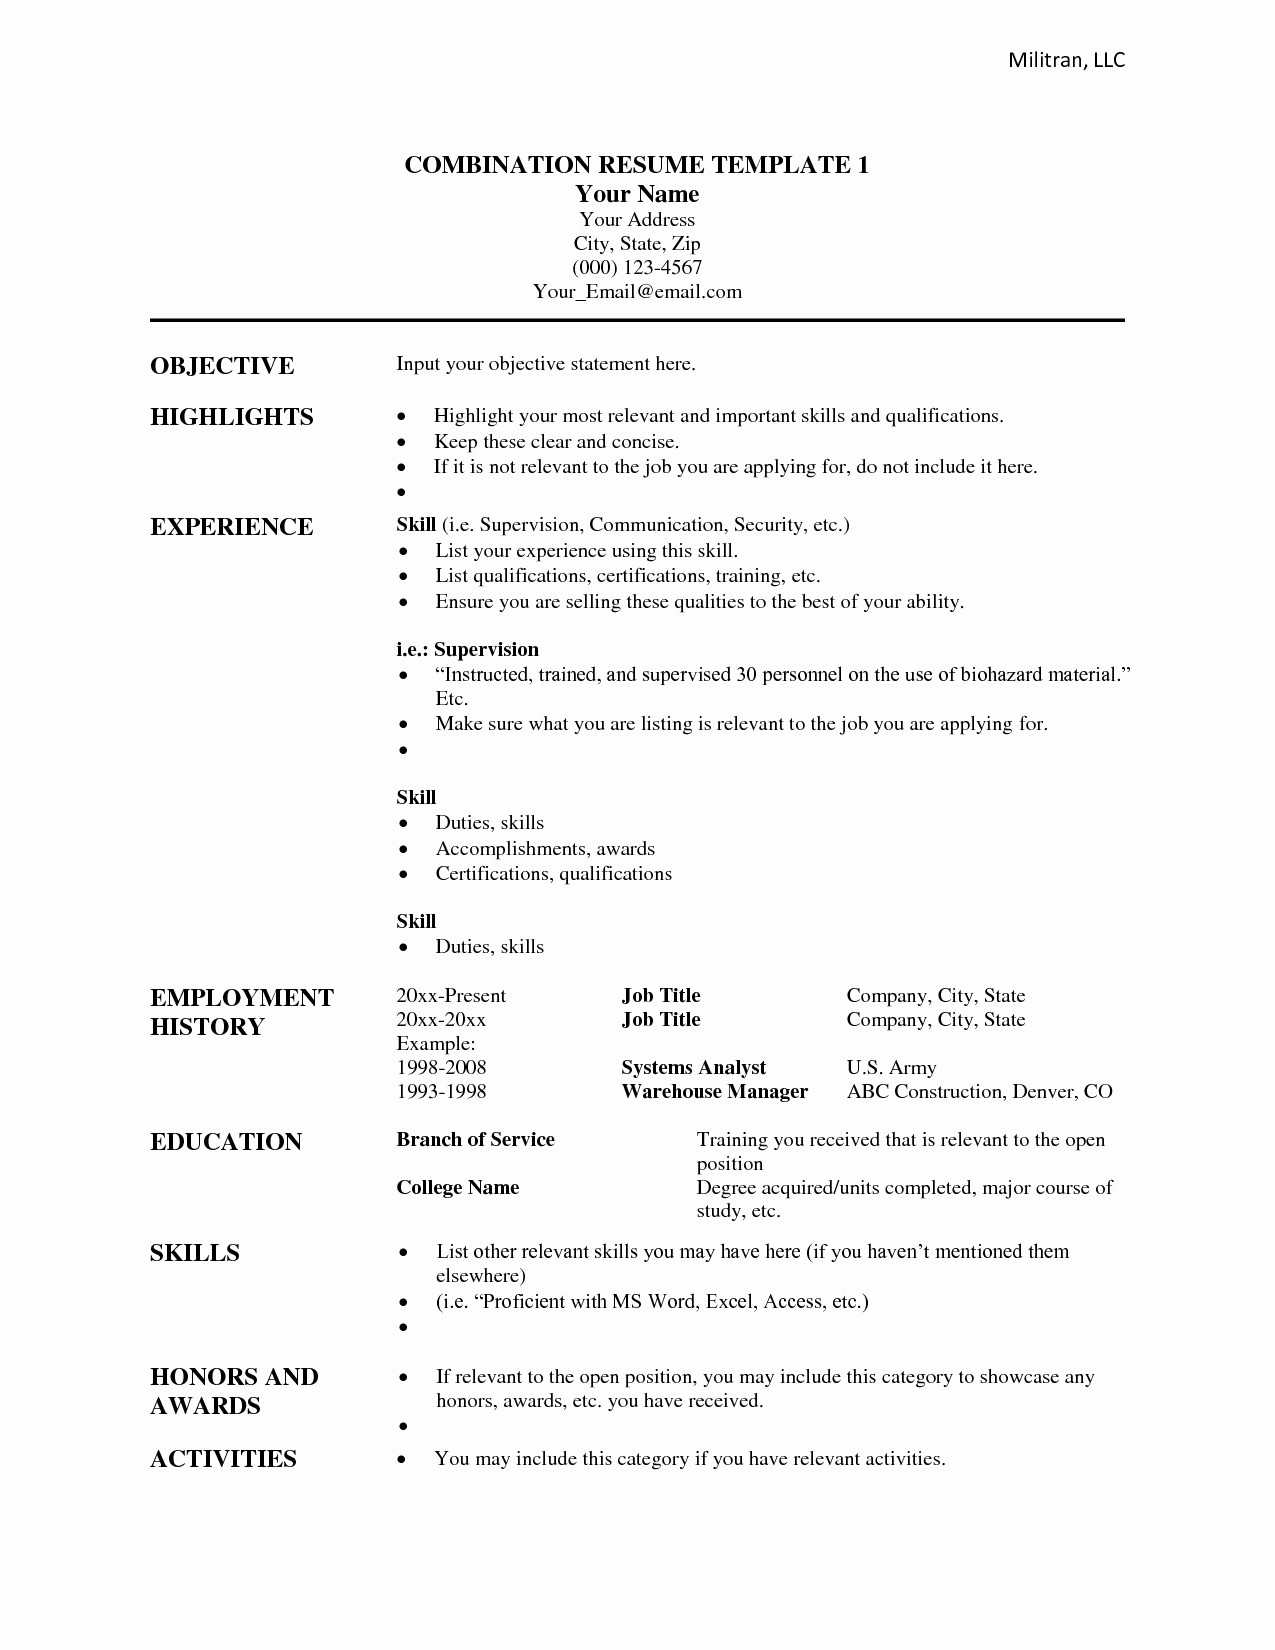 Free Word Resume Templates 2018 Lovely Free Microsoft Resume Templates Letter Examples 2018 Ms